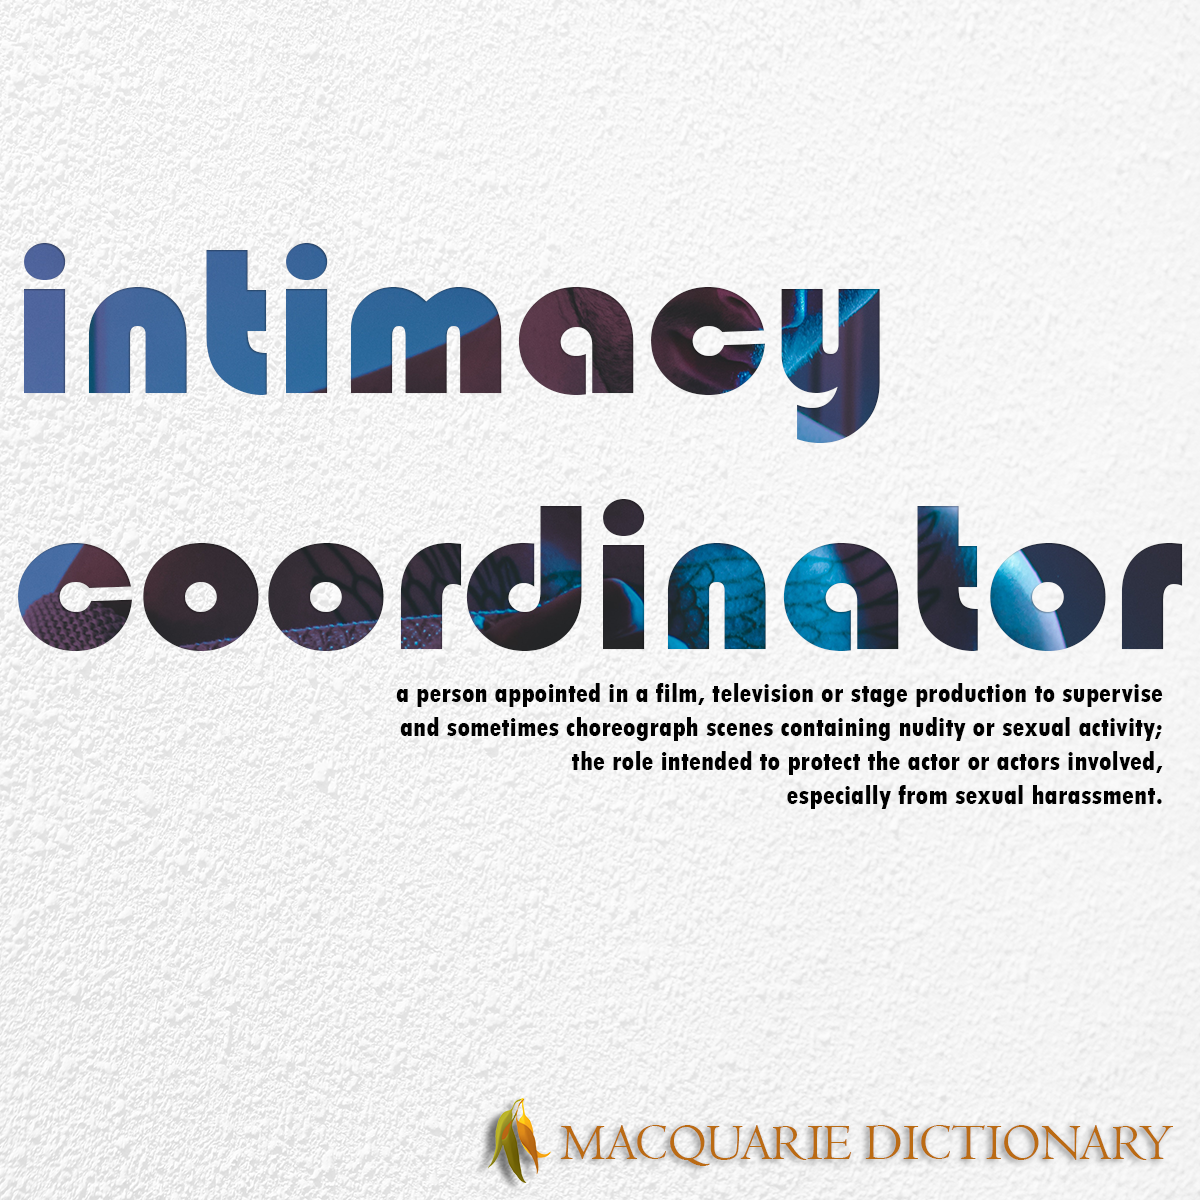 Image of Macquarie Dictionary Word of the Year - intimacy coordinator - a person appointed in a film, television or stage production to supervise and sometimes choreograph scenes containing nudity or sexual activity, the role intended to protect the actor or actors involved, especially from sexual harassment. 